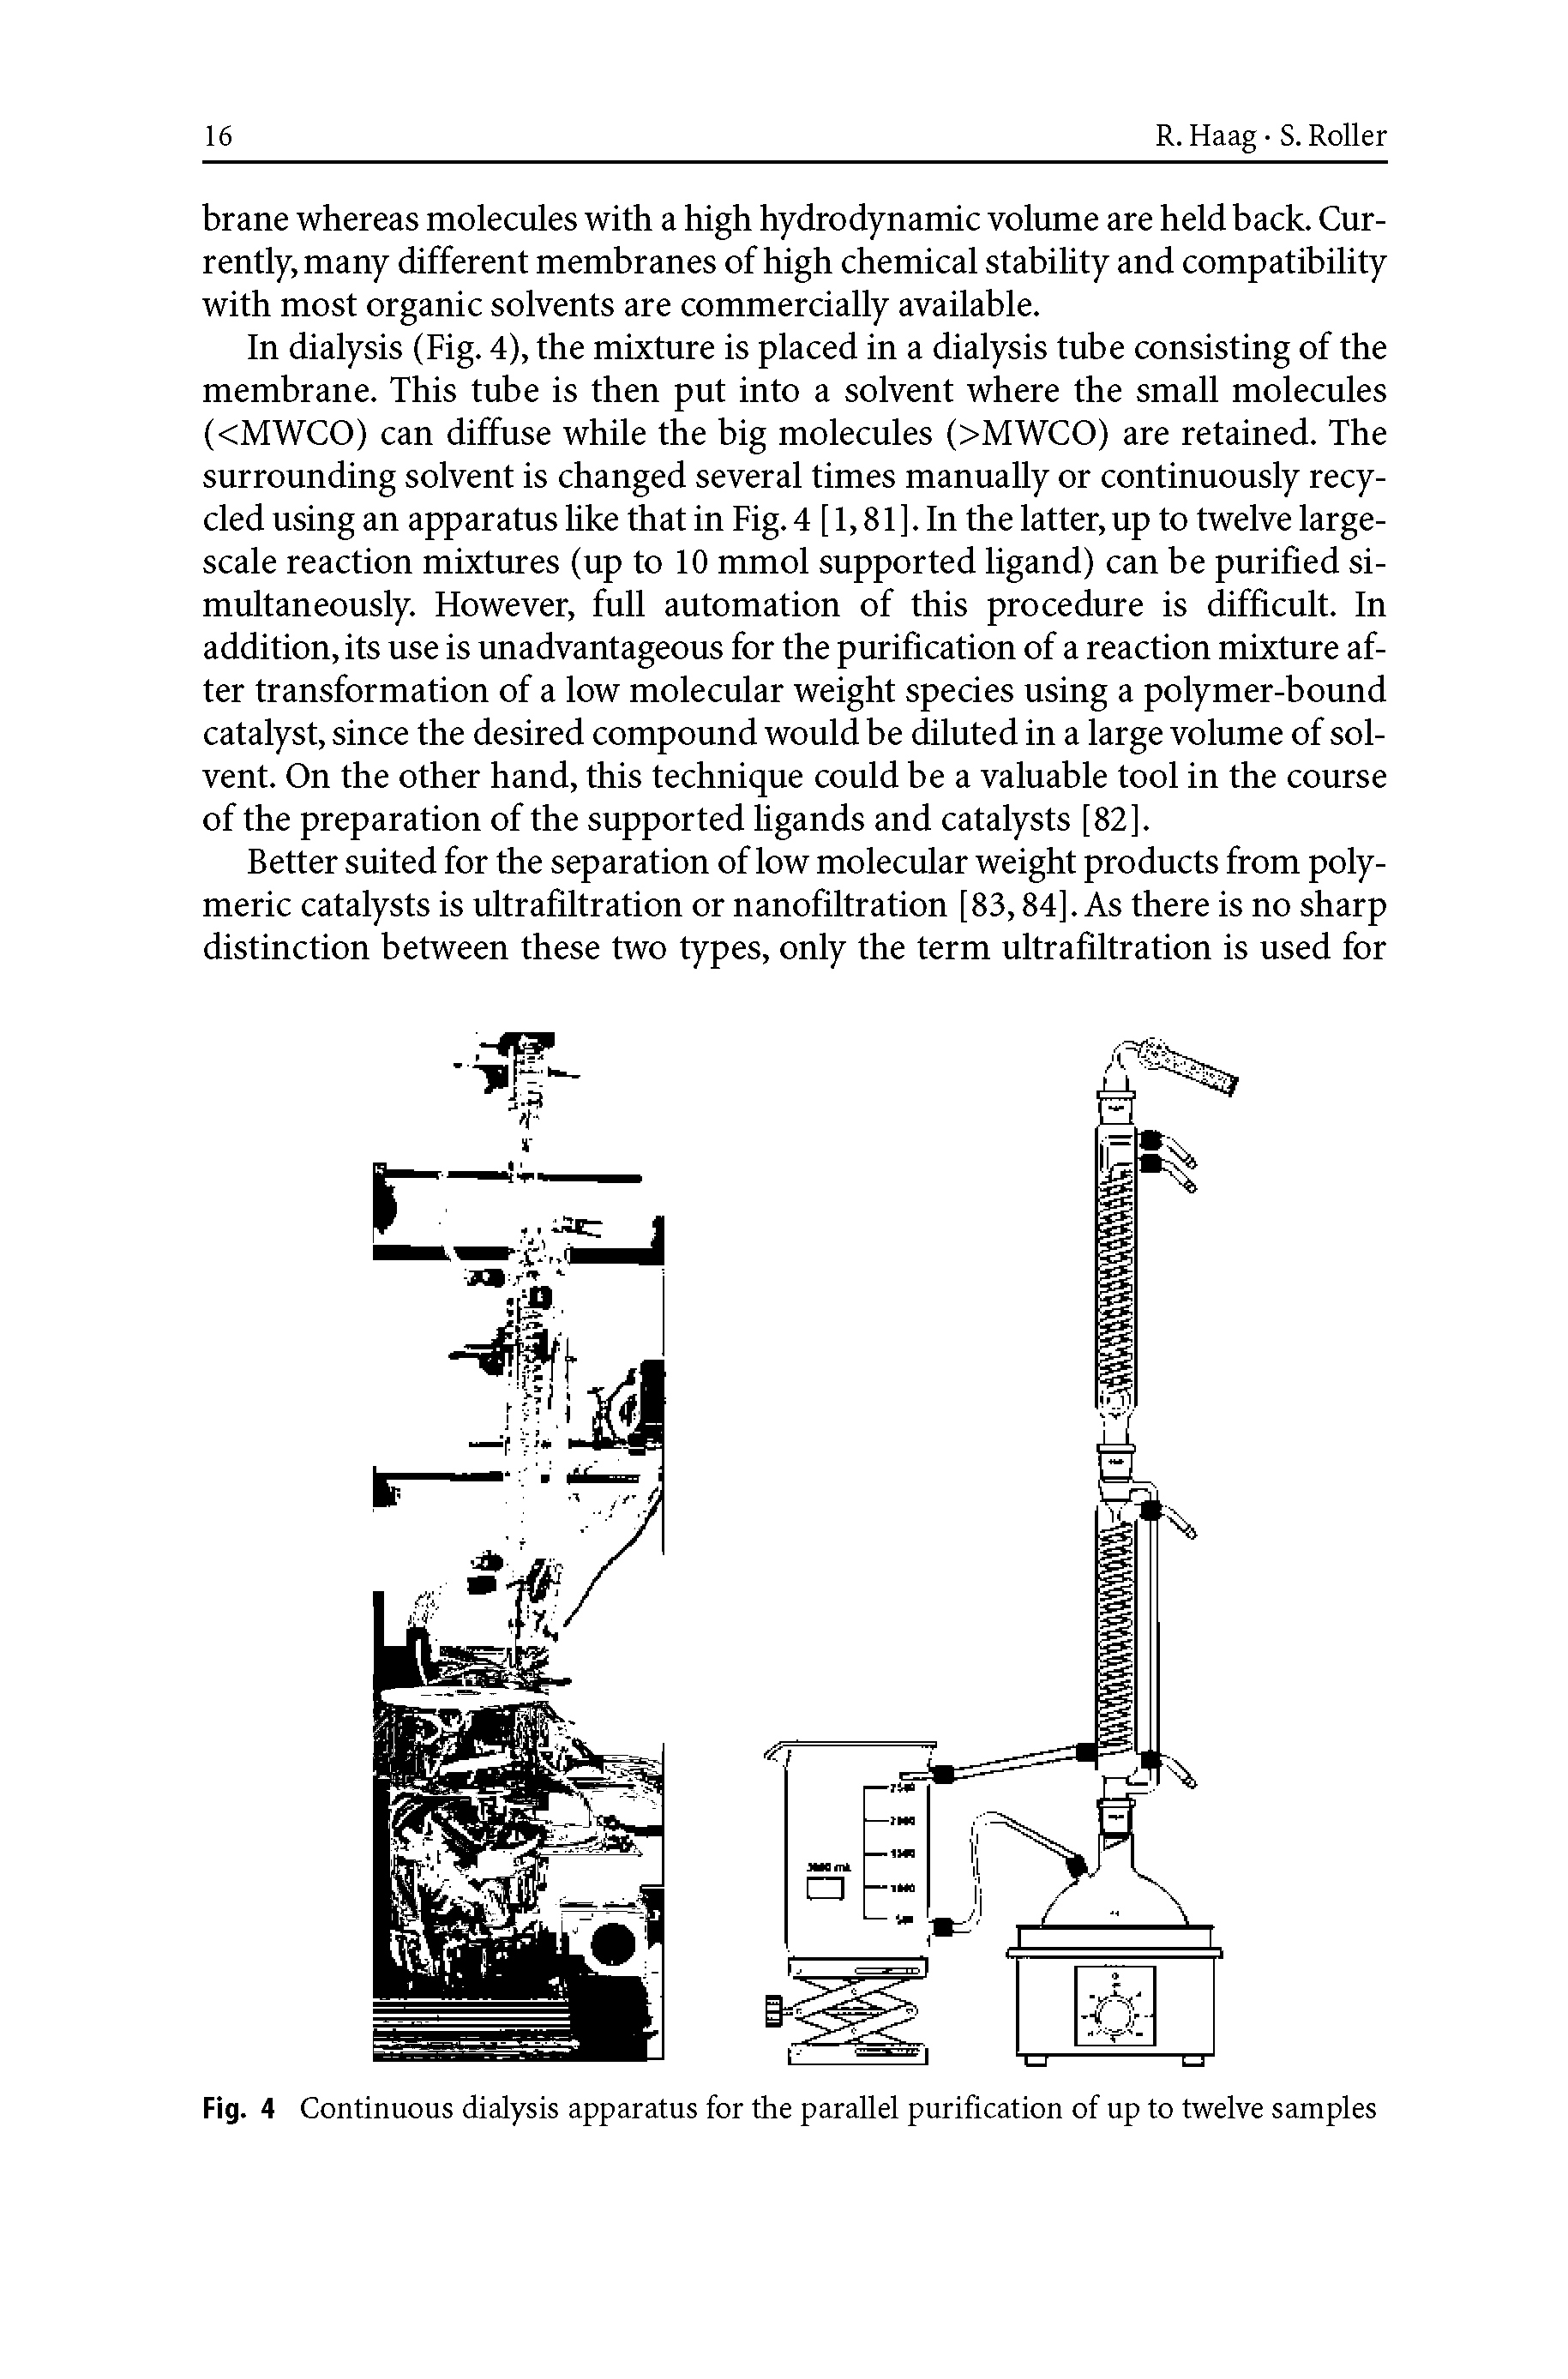 Fig. 4 Continuous dialysis apparatus for the parallel purification of up to twelve samples...